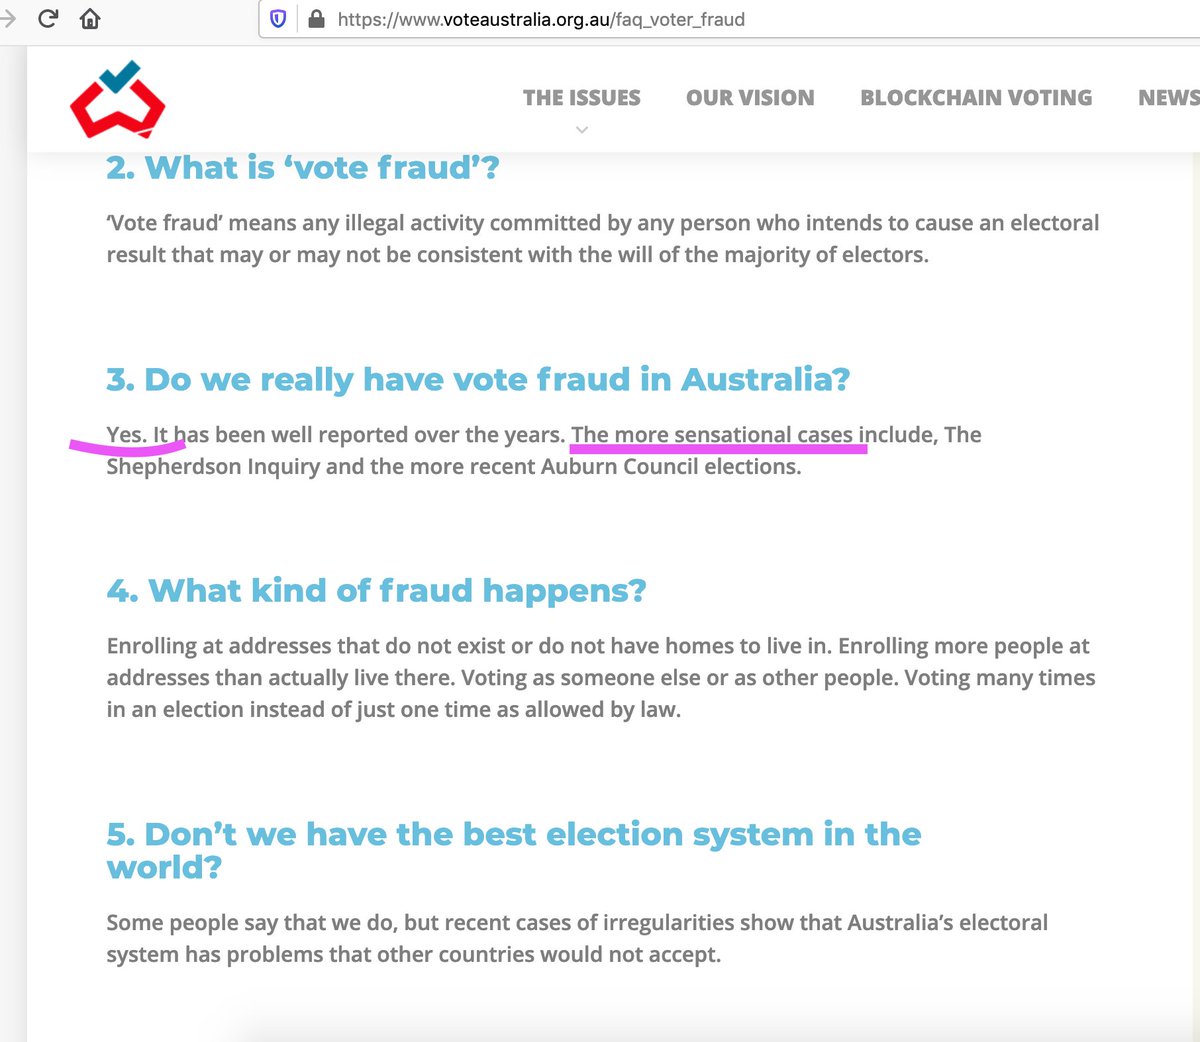 . . . you can also register there so you can "stay informed" & have your data bought/used by conservative pollsters without your permission.And none of this astroturfing web presence of course has absolutely anything to do with the Morrison government's new agenda.At all 